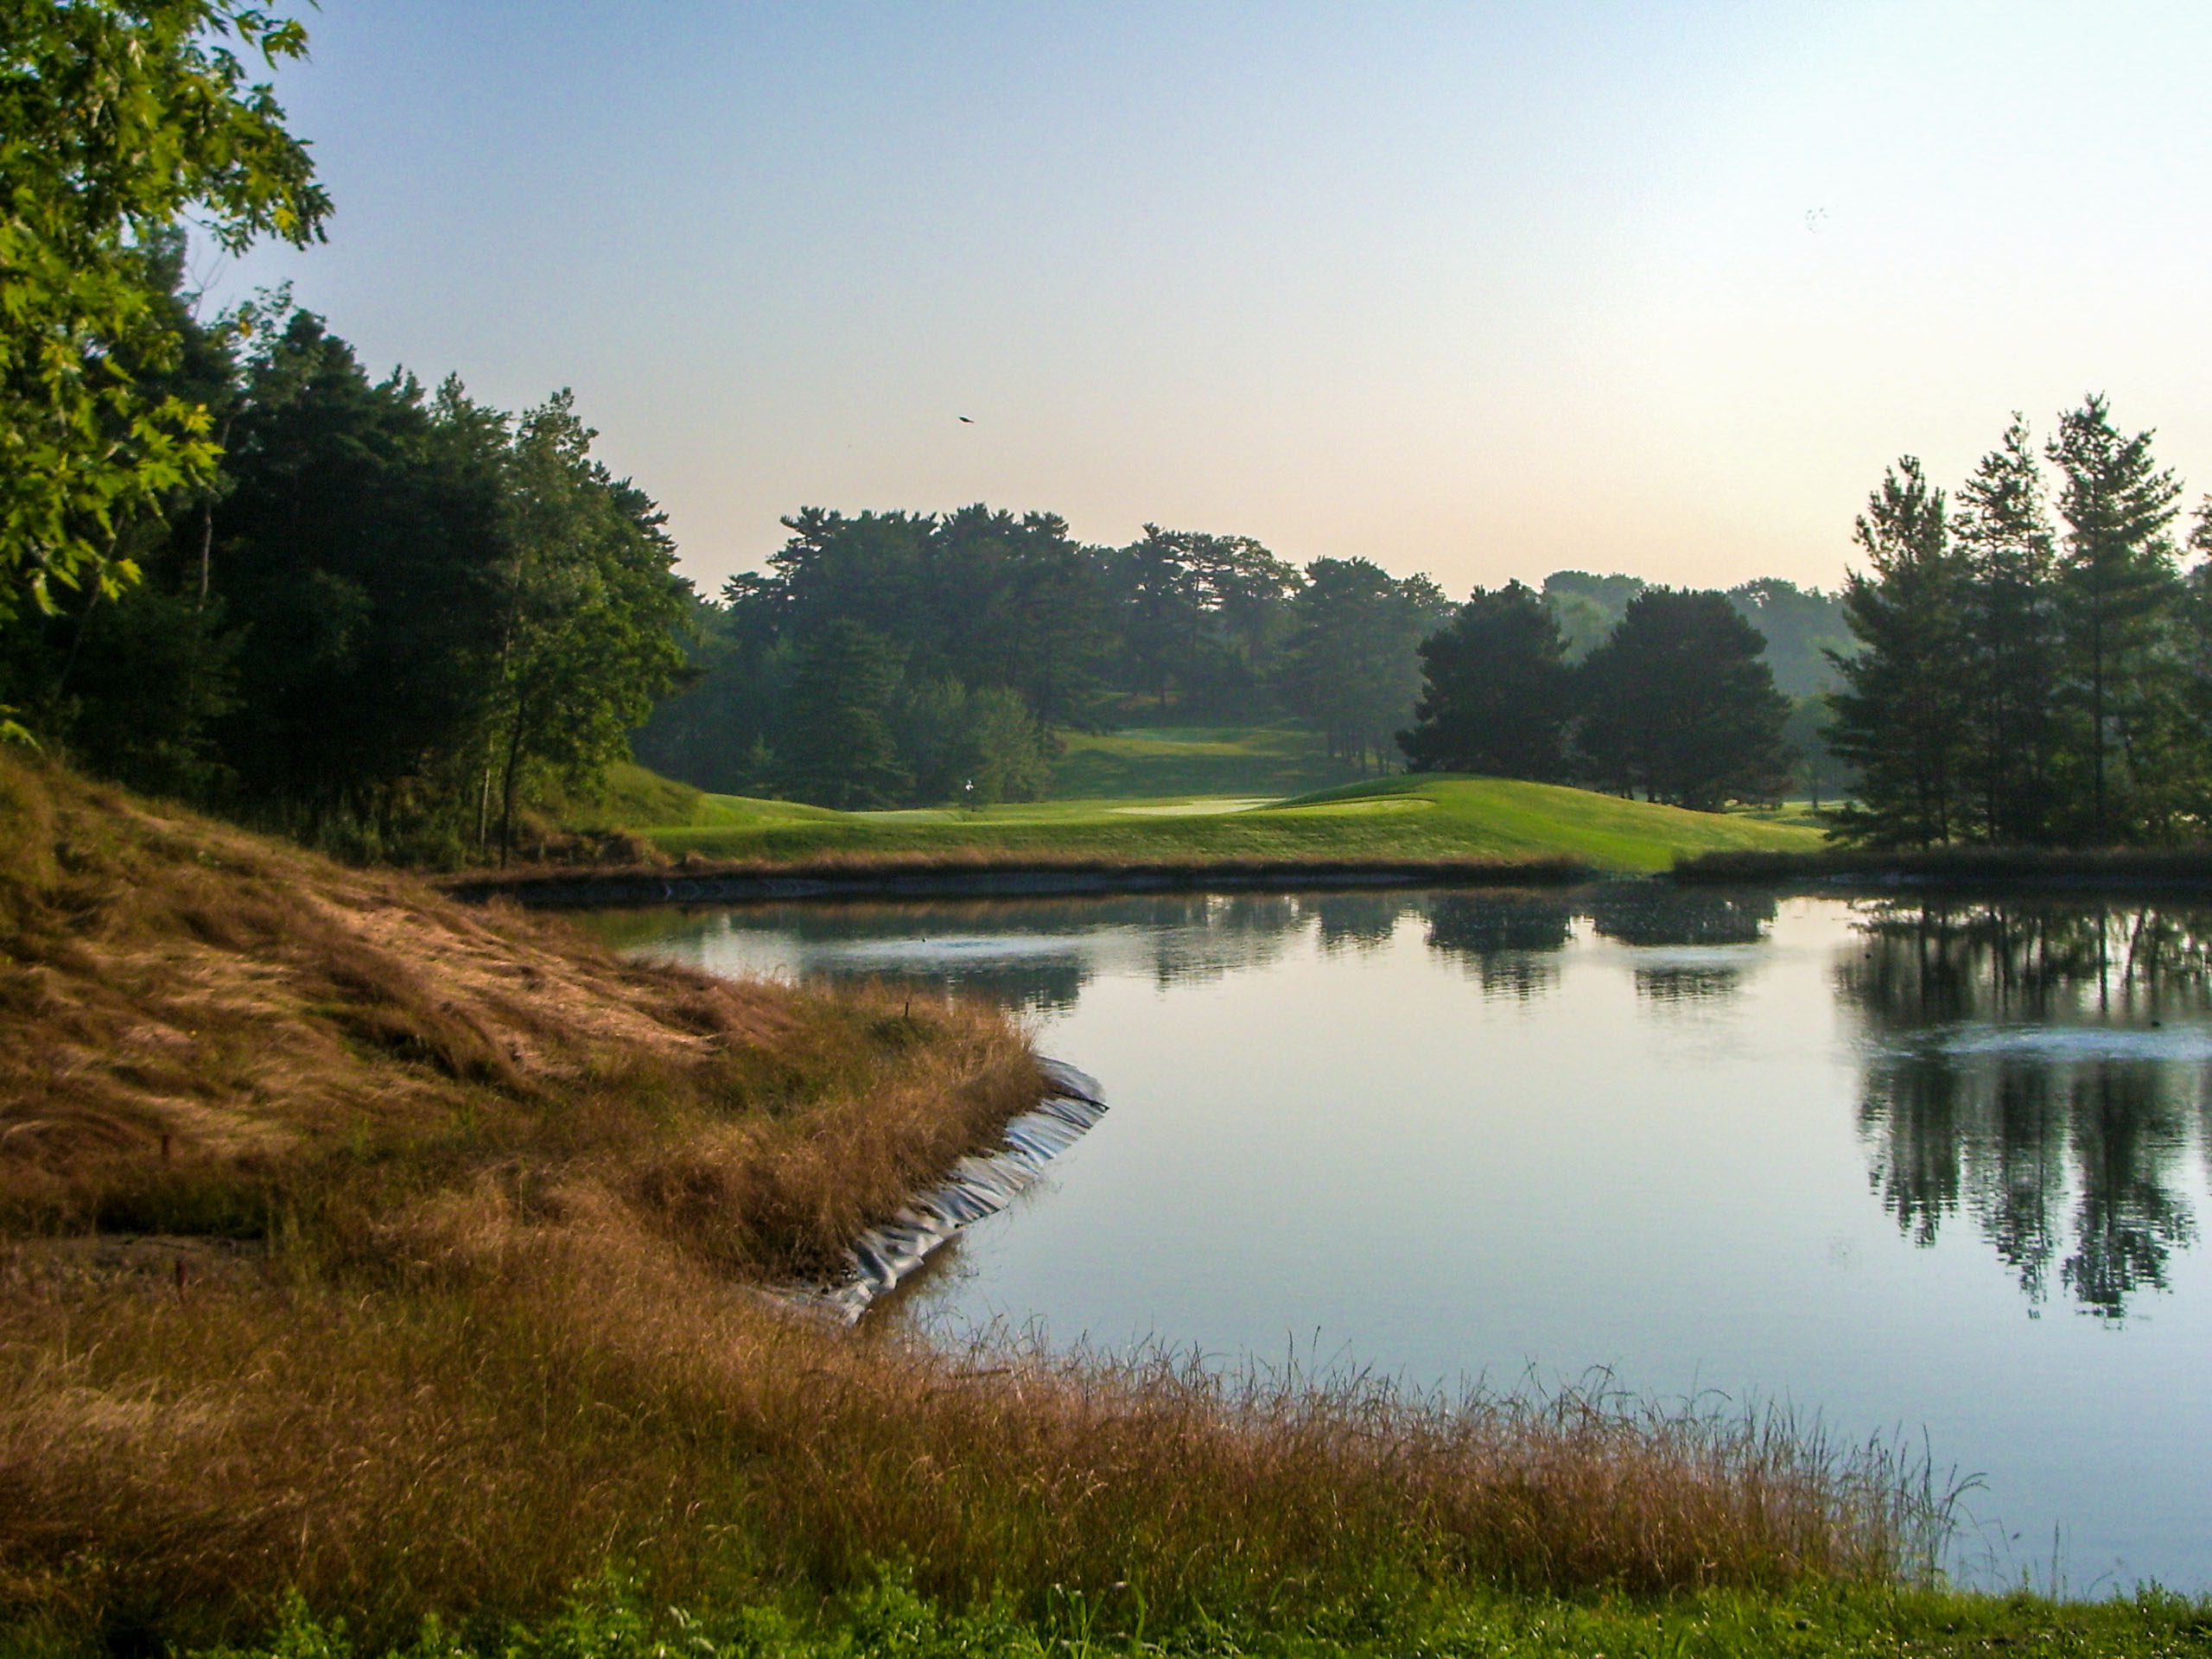 Golf Course Pond with Green in background at Dawn